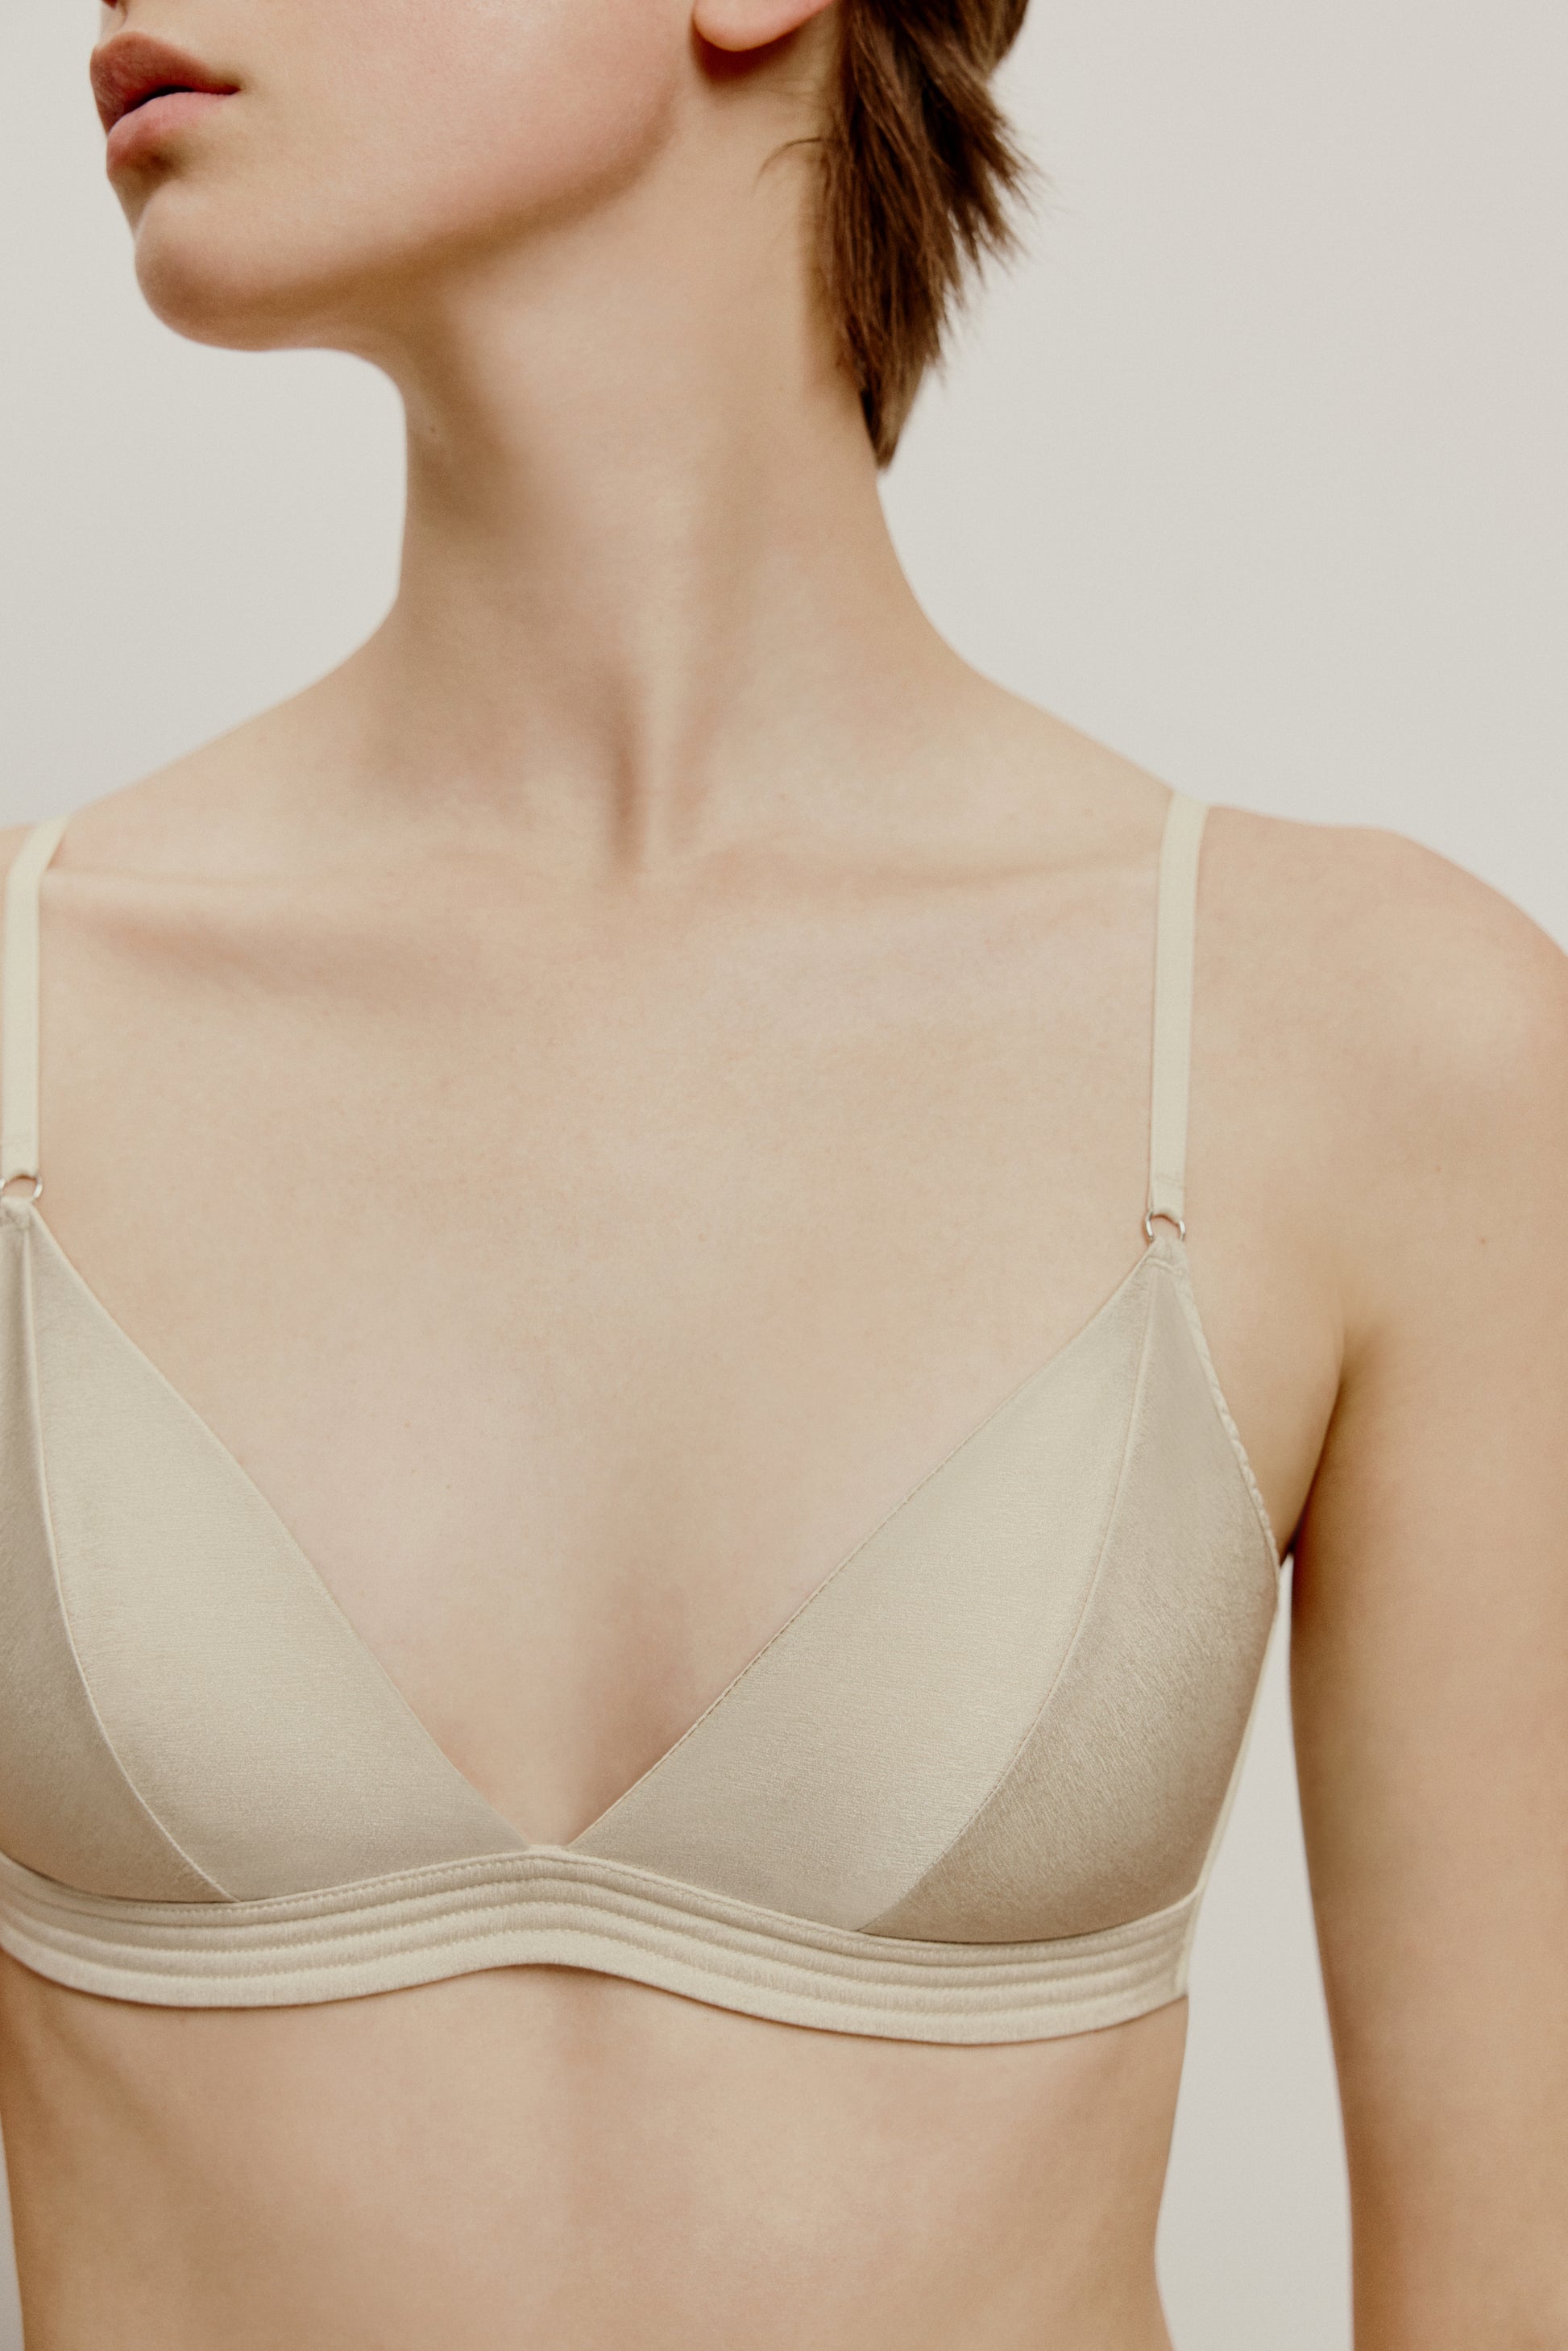 Silk Satin Triangle Soft Cup Smooth and Comfortable Wireless Bra.